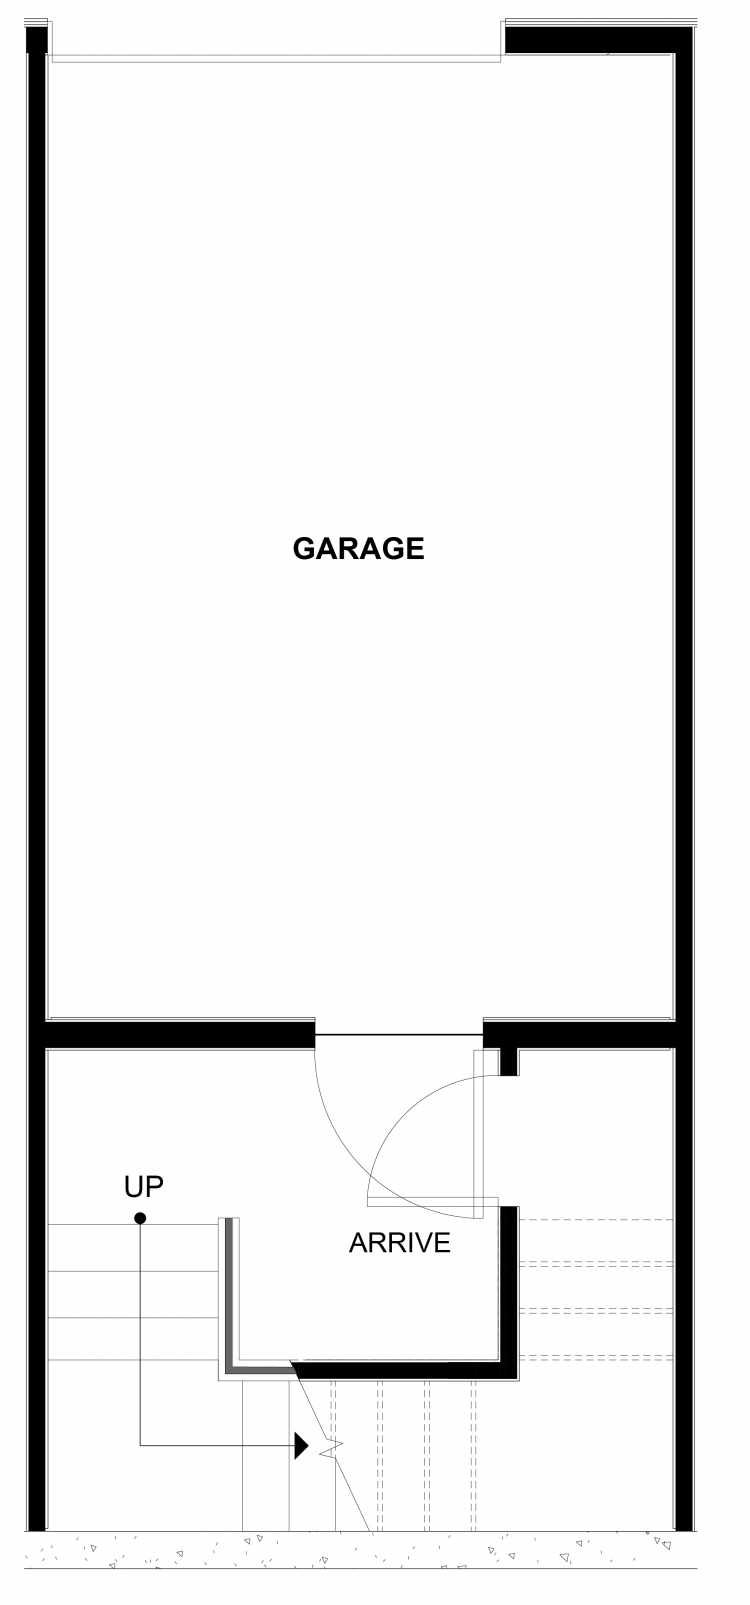 First Floor Plan of 1540 15th Ave E, One of the Larrabee Townhomes in Capitol Hill